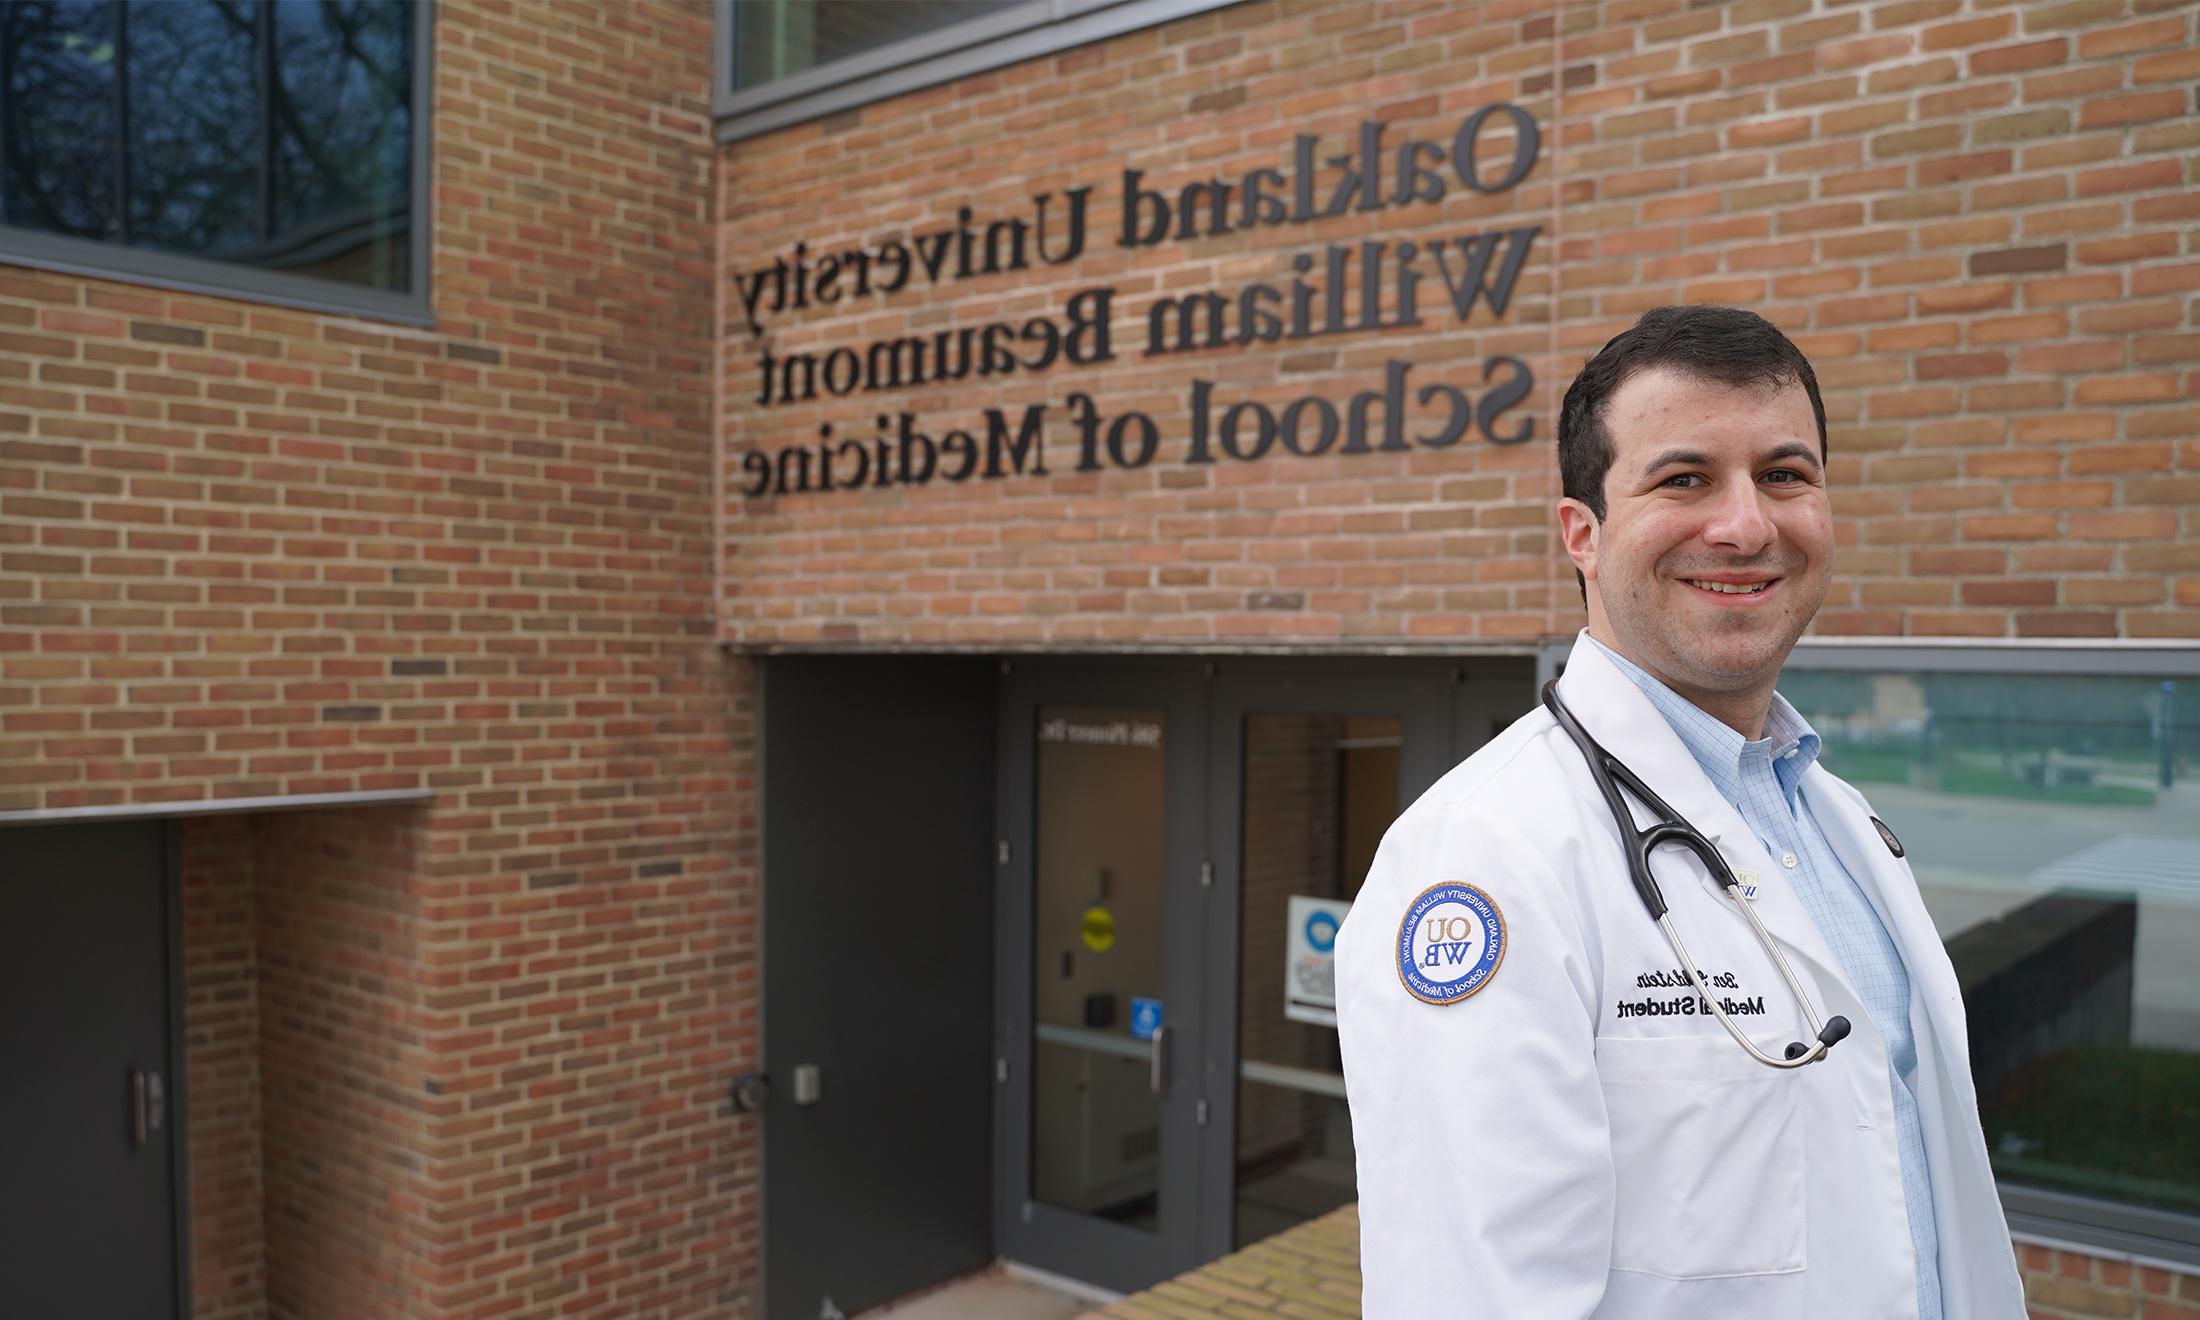 An image of OUWB student Benjamin Goldstein in front of the school's sign